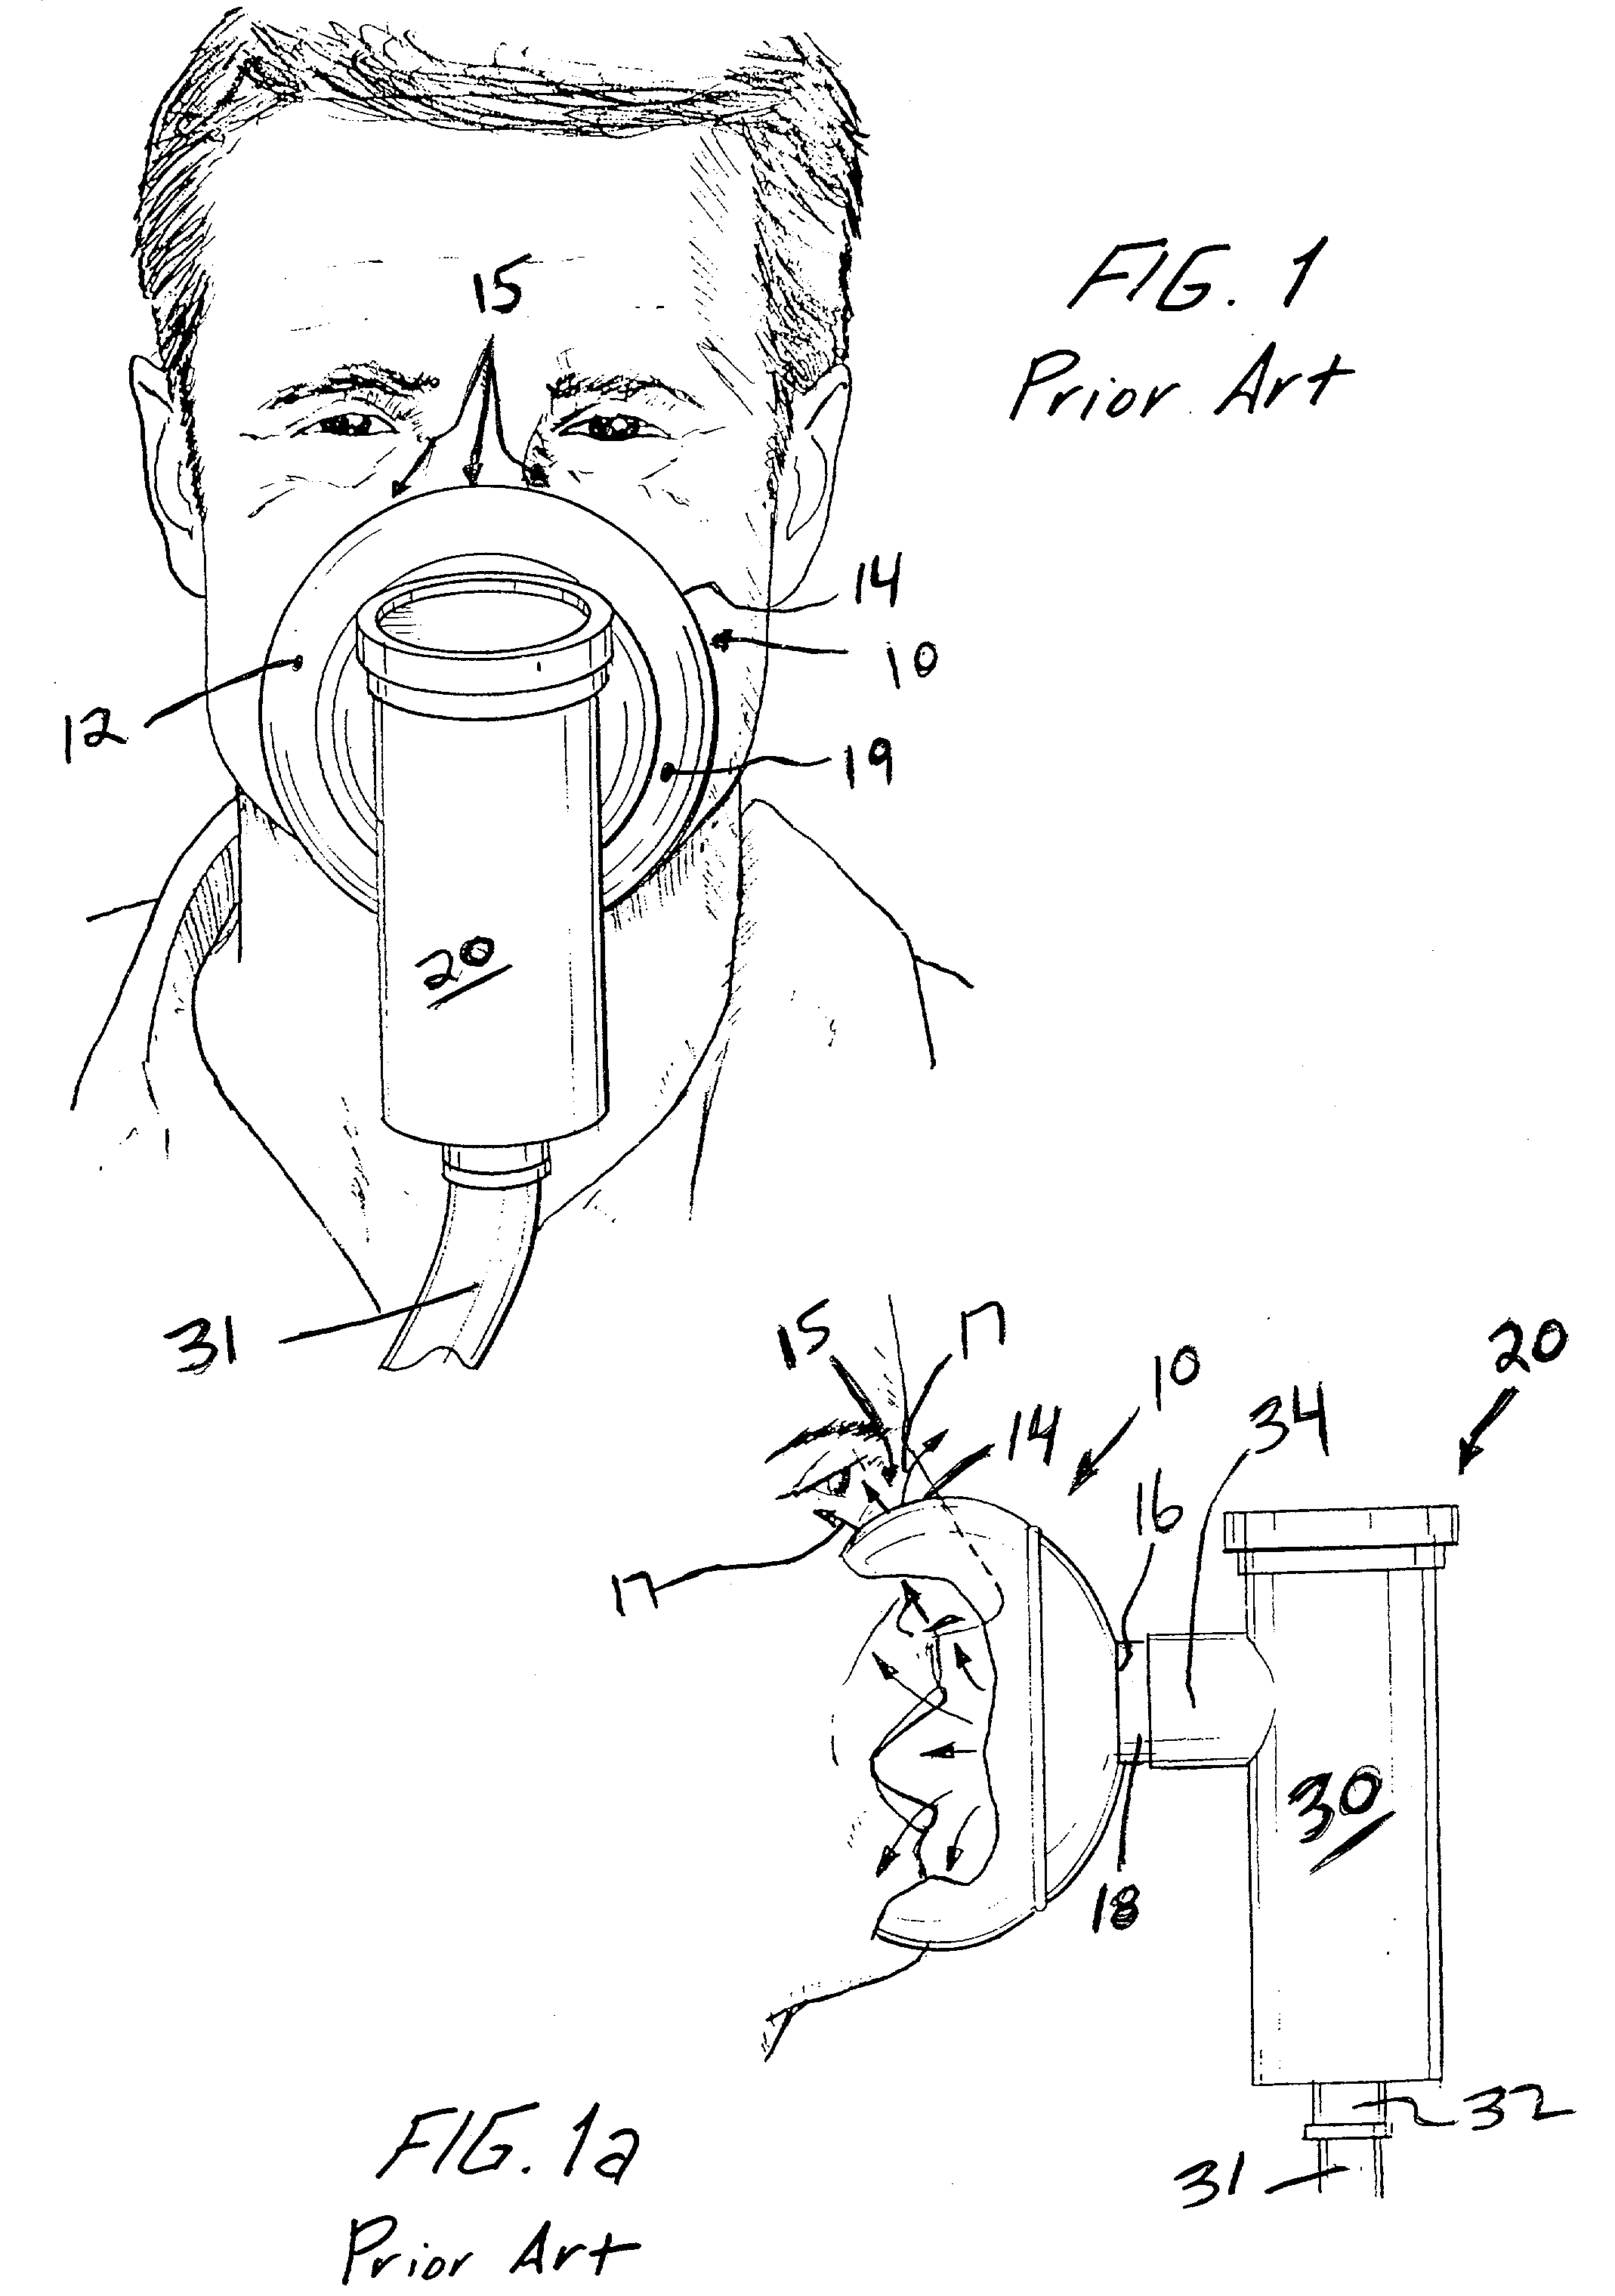 Face masks for use in pressurized drug delivery systems